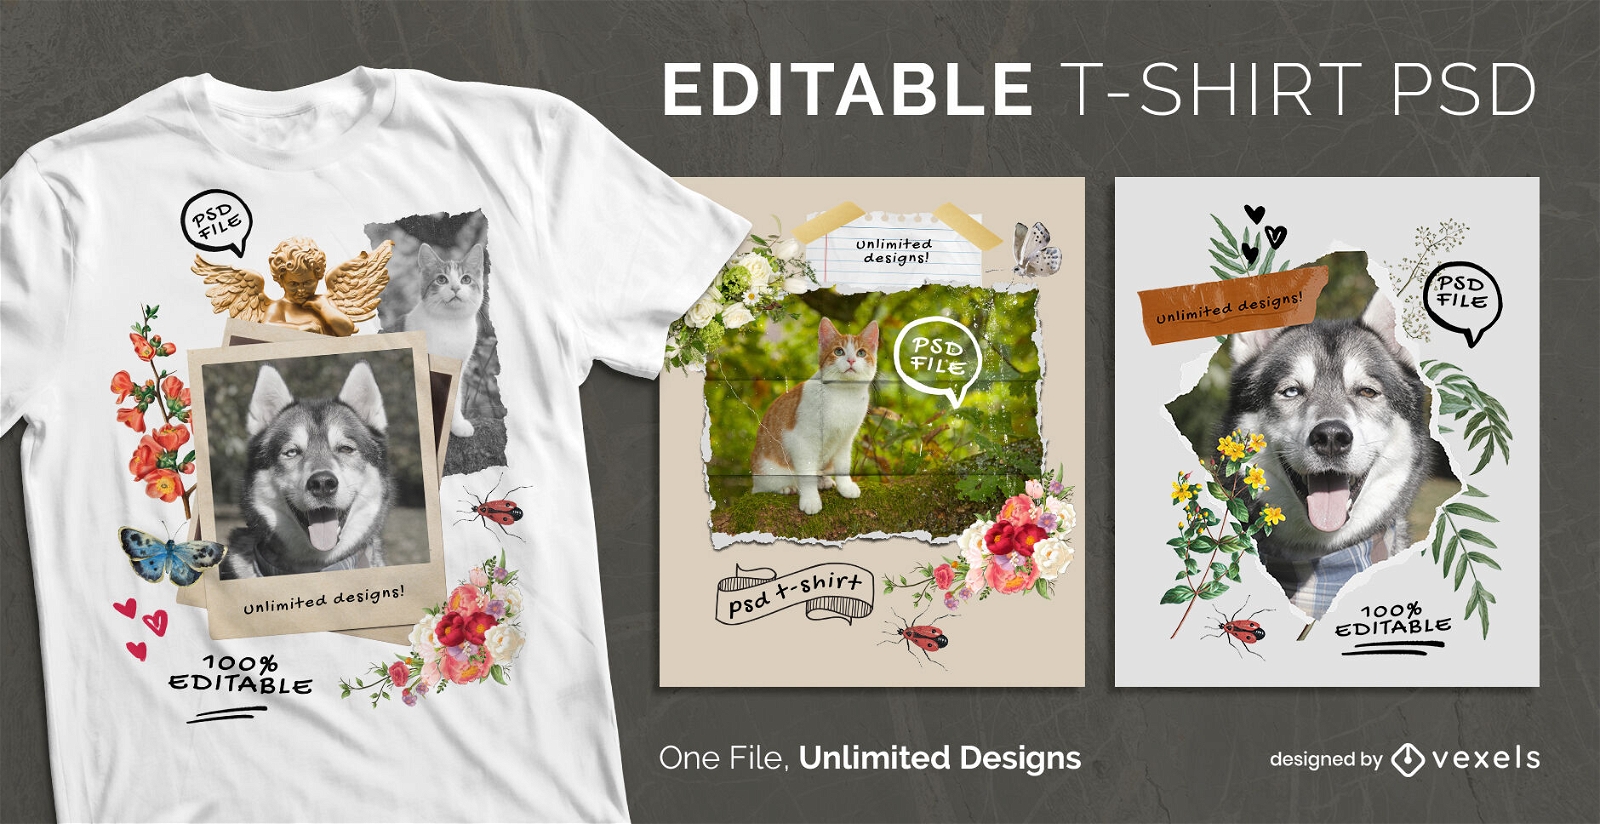 Pets and flowers collage scalable t-shirt psd